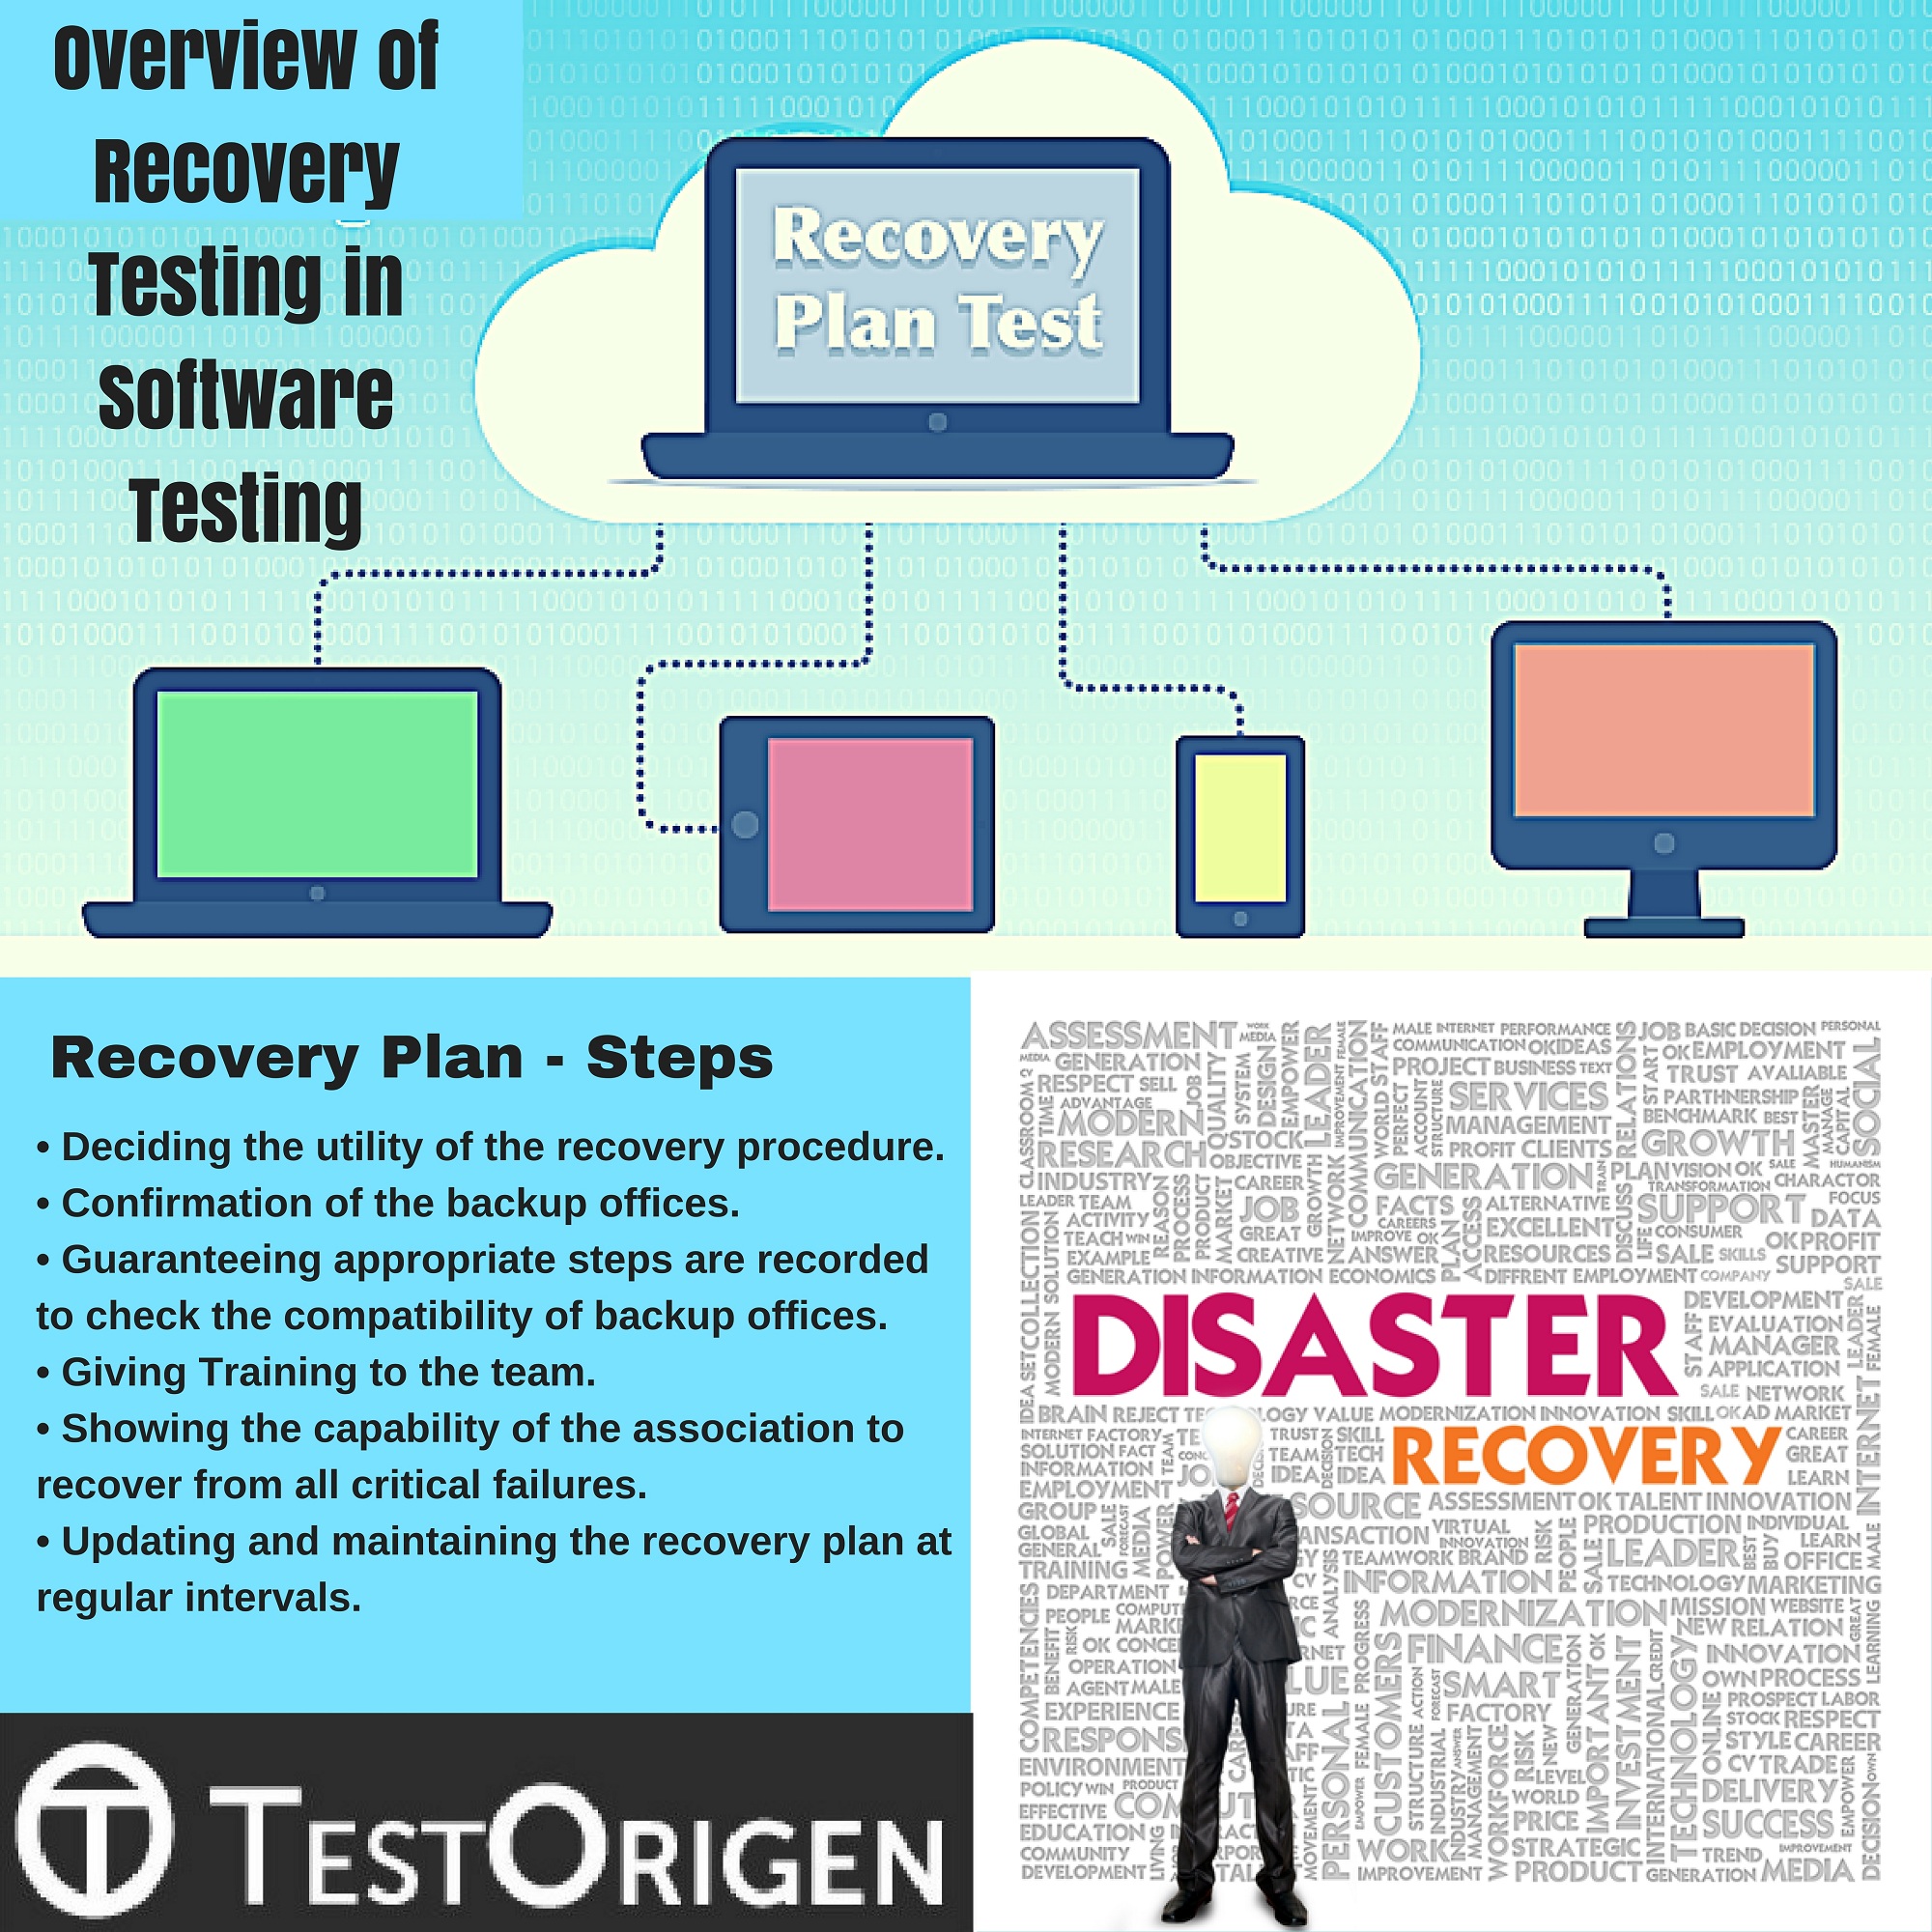 Overview of Recovery Testing in Software Testing